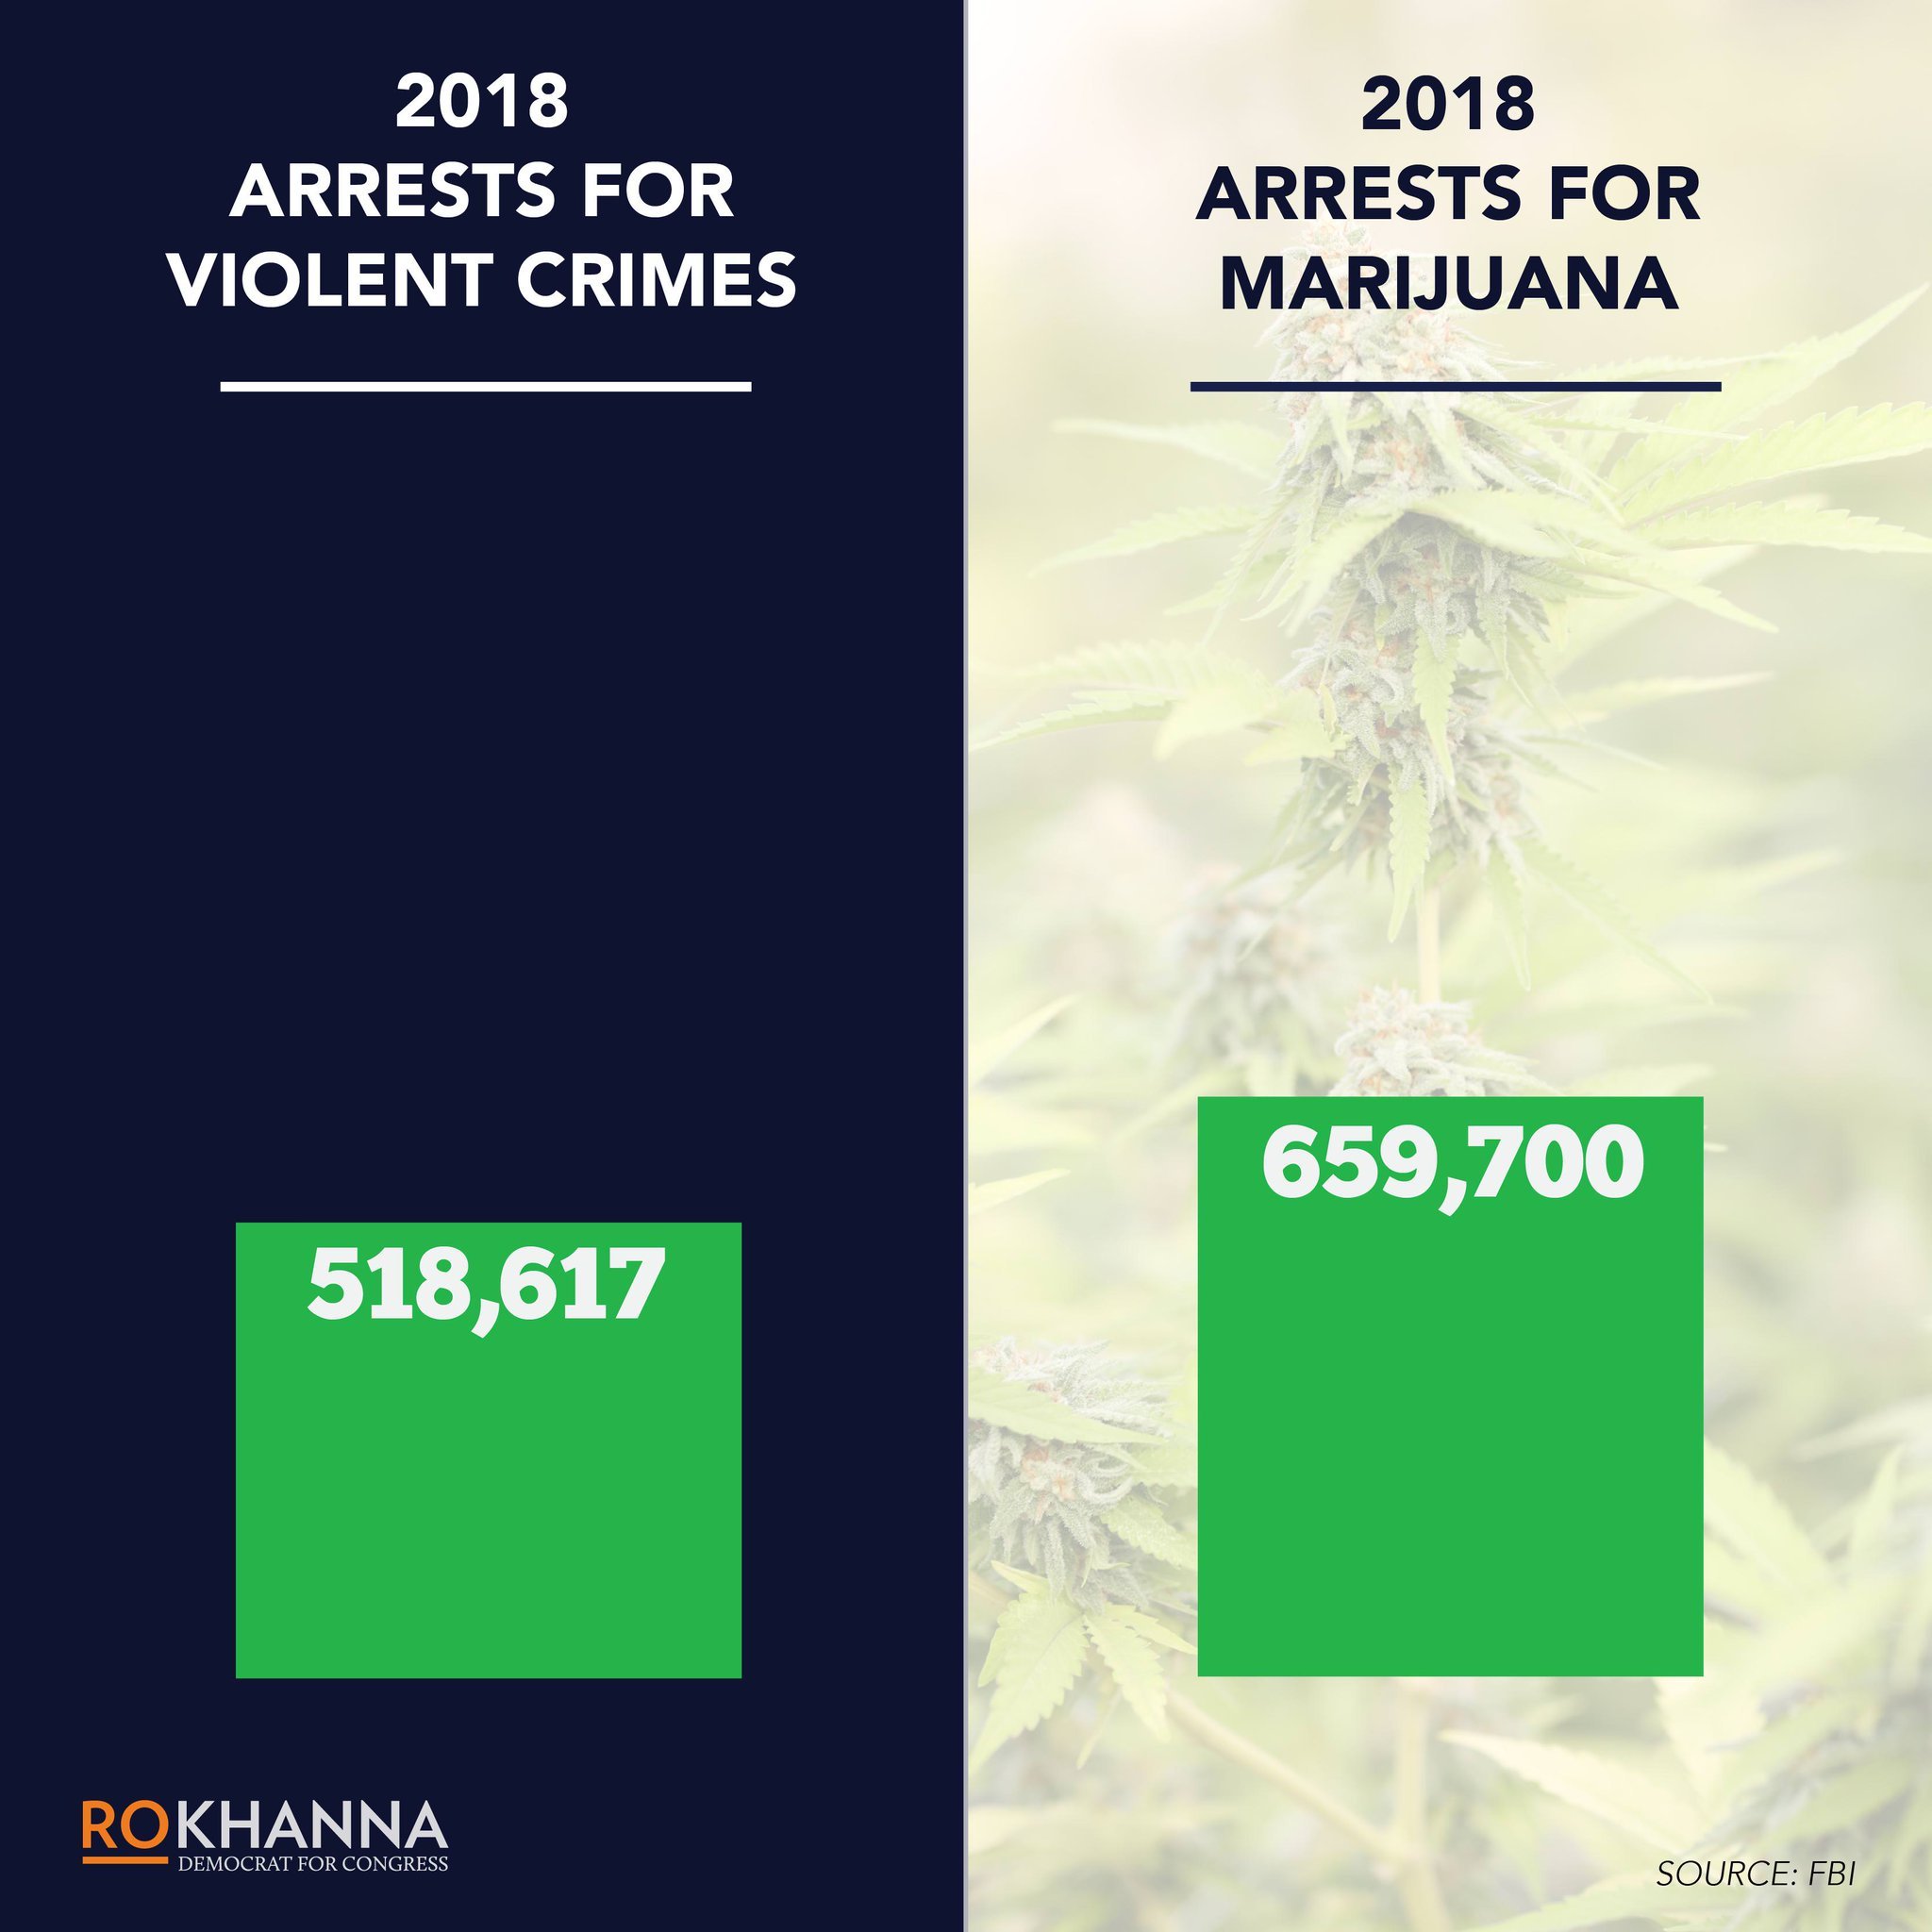 Congressman: "When more Americans are arrested for marijuana than for committing violent crimes, it’s clear that the priorities of our justice system are completely out of order."